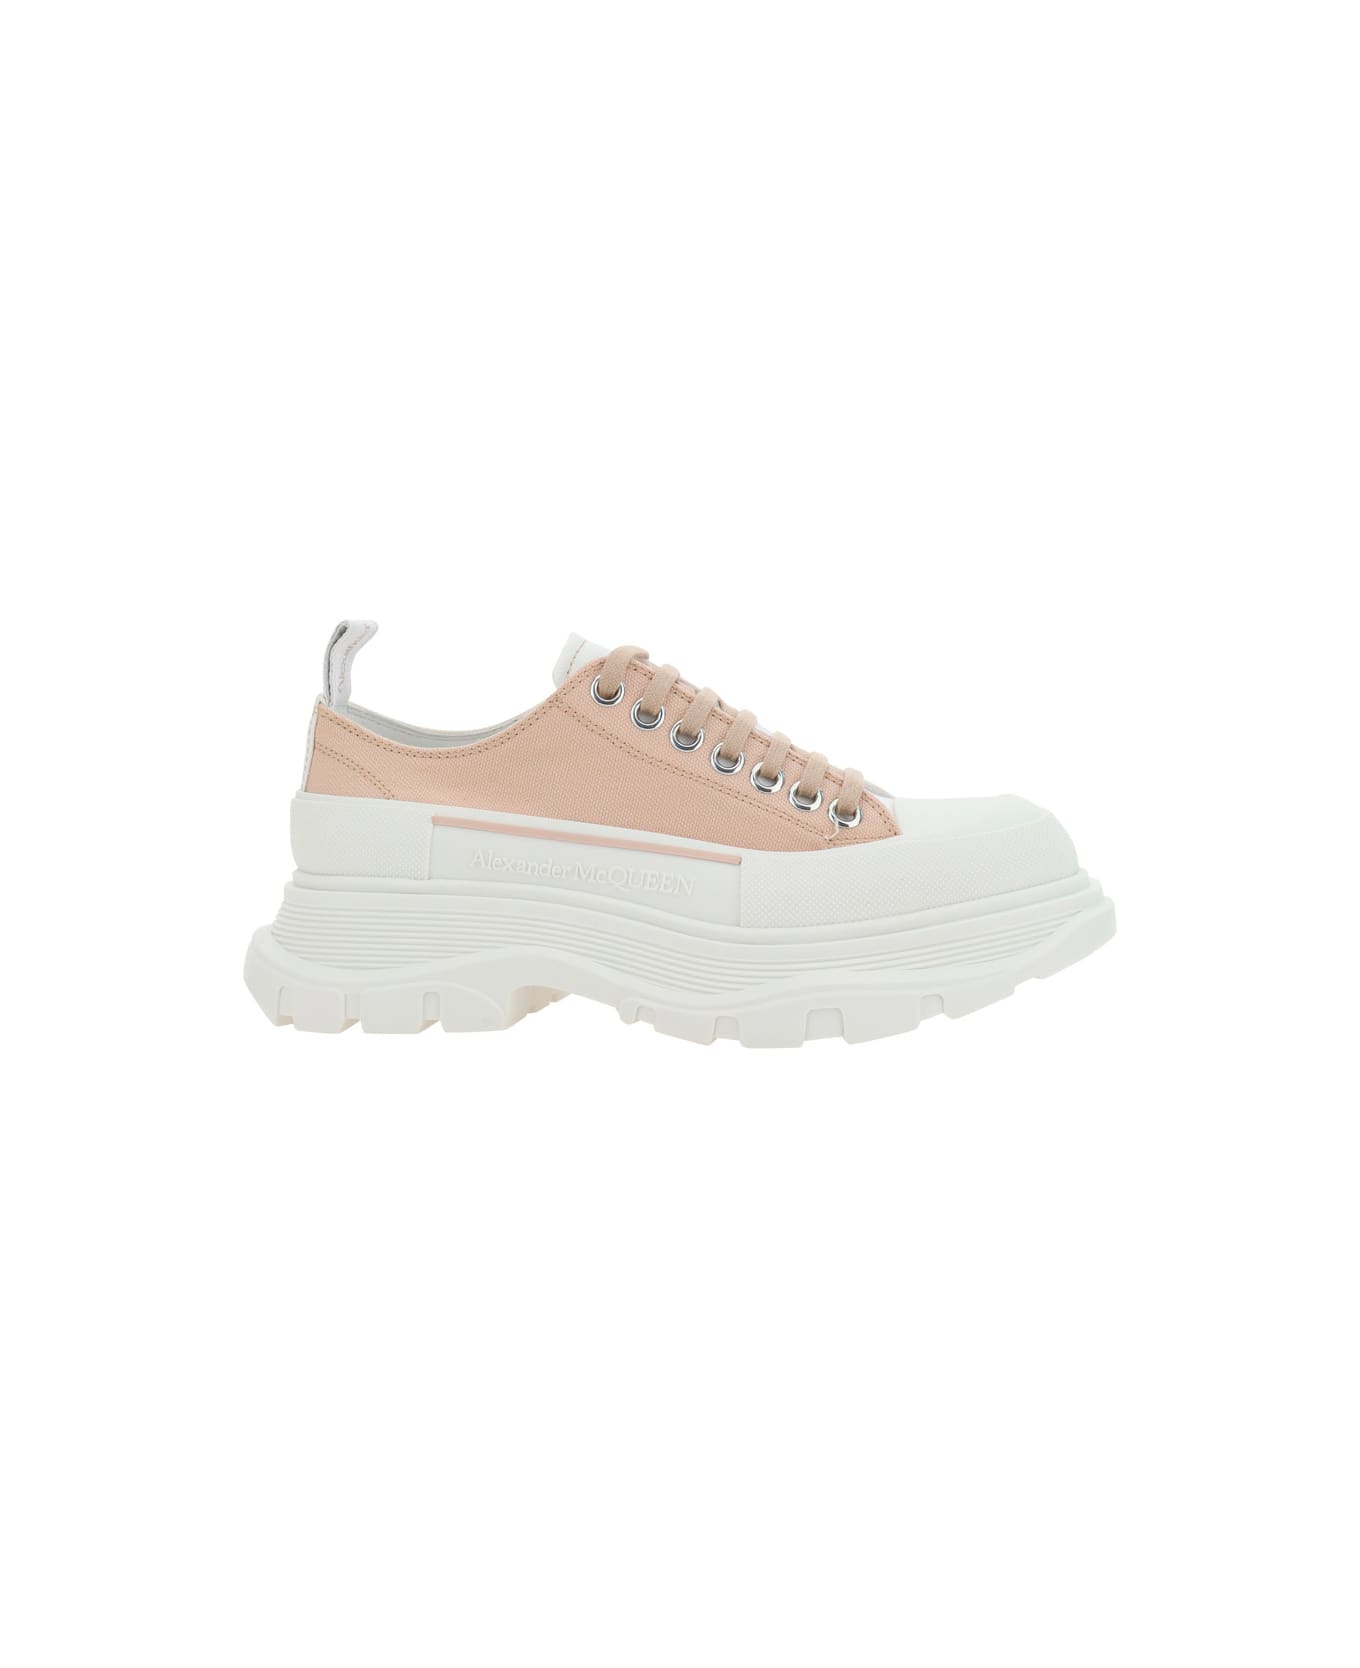 Alexander McQueen Tread Slick Sneakers - Bl Bo Wh Of Wh Bl